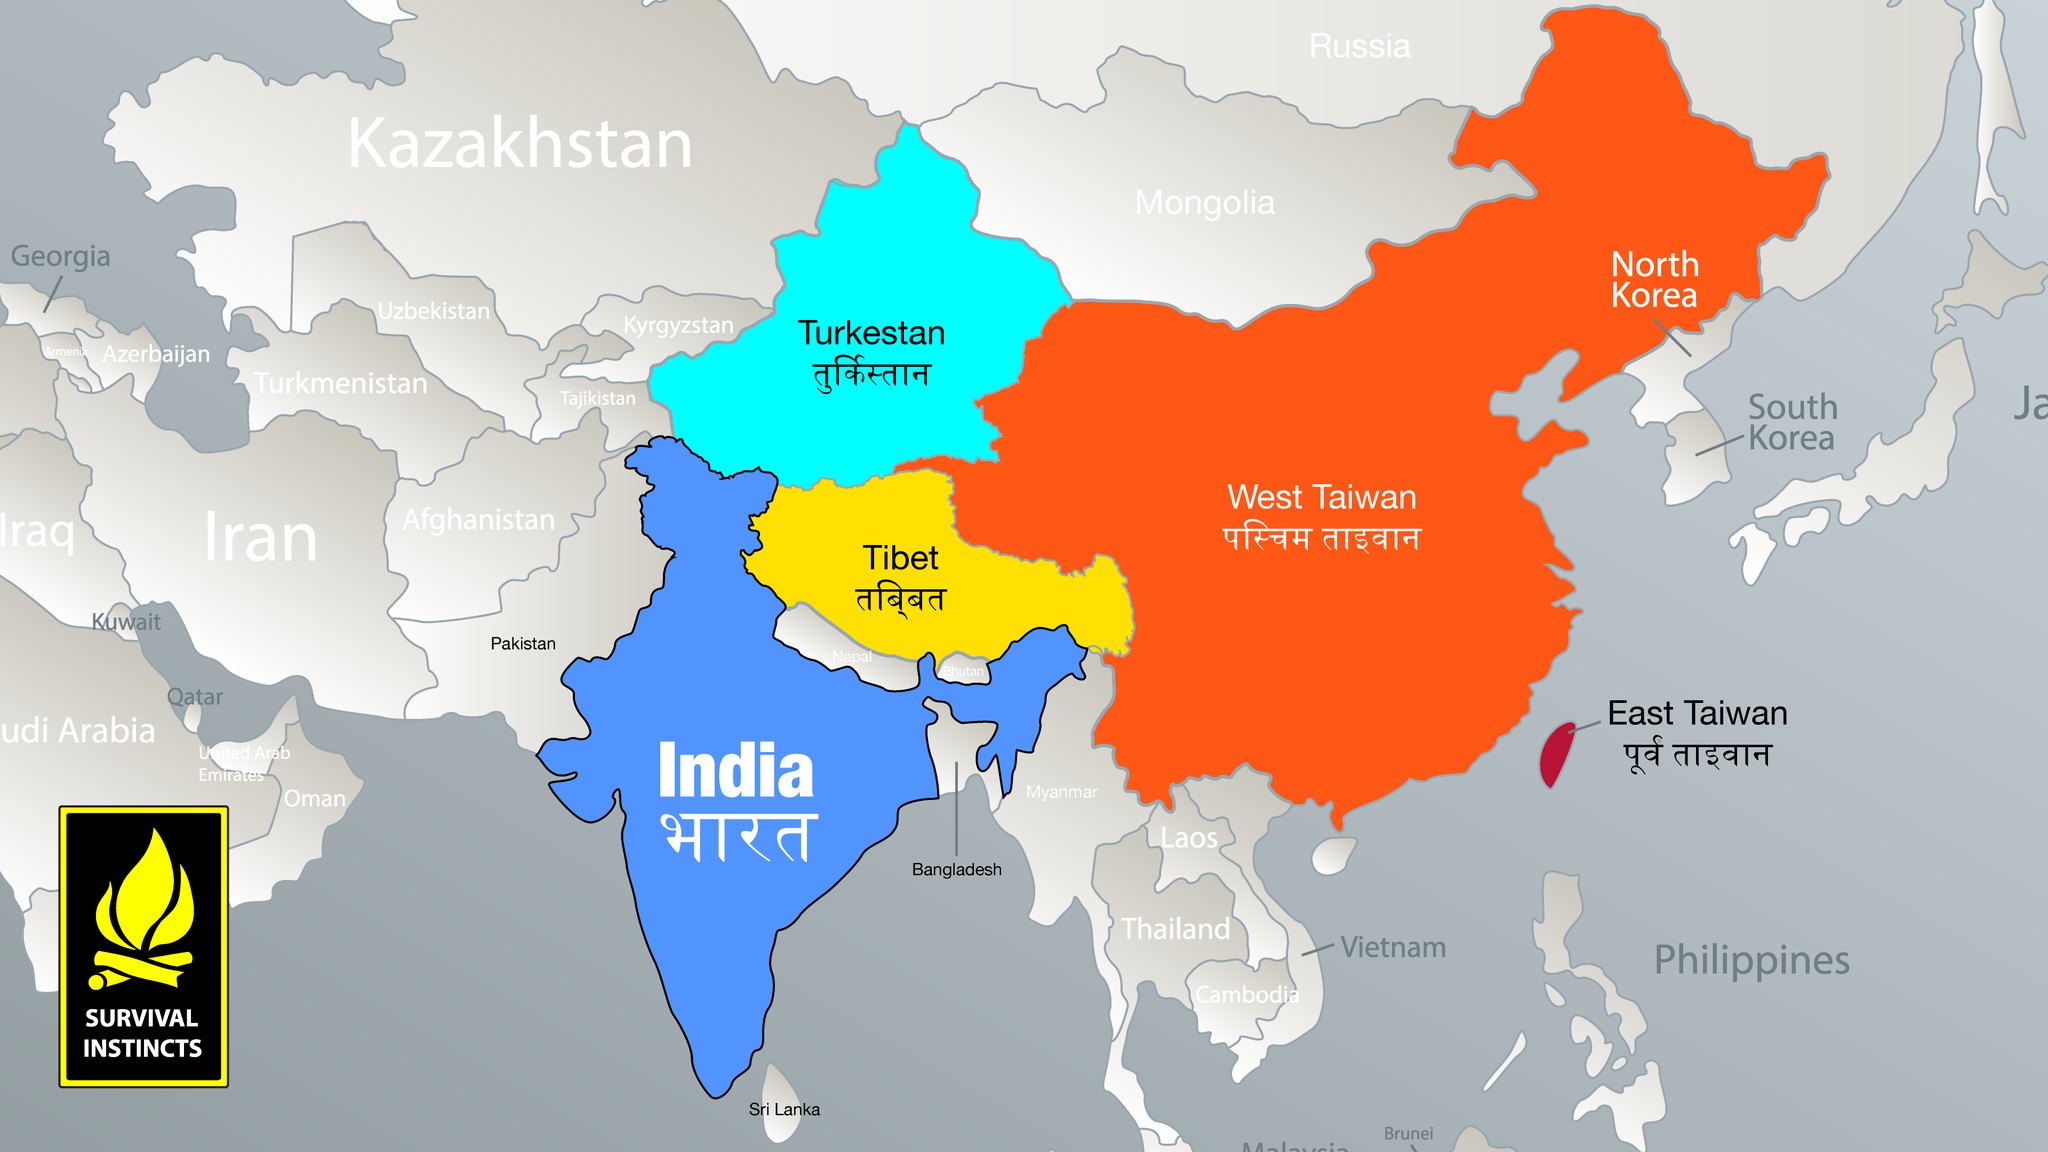 It is important to spread awareness that Indians should be aware of the potential consequences if India were to change the names of places in China. Such a move would undoubtedly lead to increased tensions between these two nations, and could even spark an international conflict. It is essential for both countries' leaders as well as citizens to remember their shared history and strive towards peaceful coexistence instead of hostility or aggression. Doing so requires understanding each other's cultures, beliefs, values and traditions only then can mutual respect prevail over prejudice or animosity. Ultimately it falls upon us all not just those who are directly affected by such decisions but everyone around the world to promote peace rather than discord amongst our global neighbours